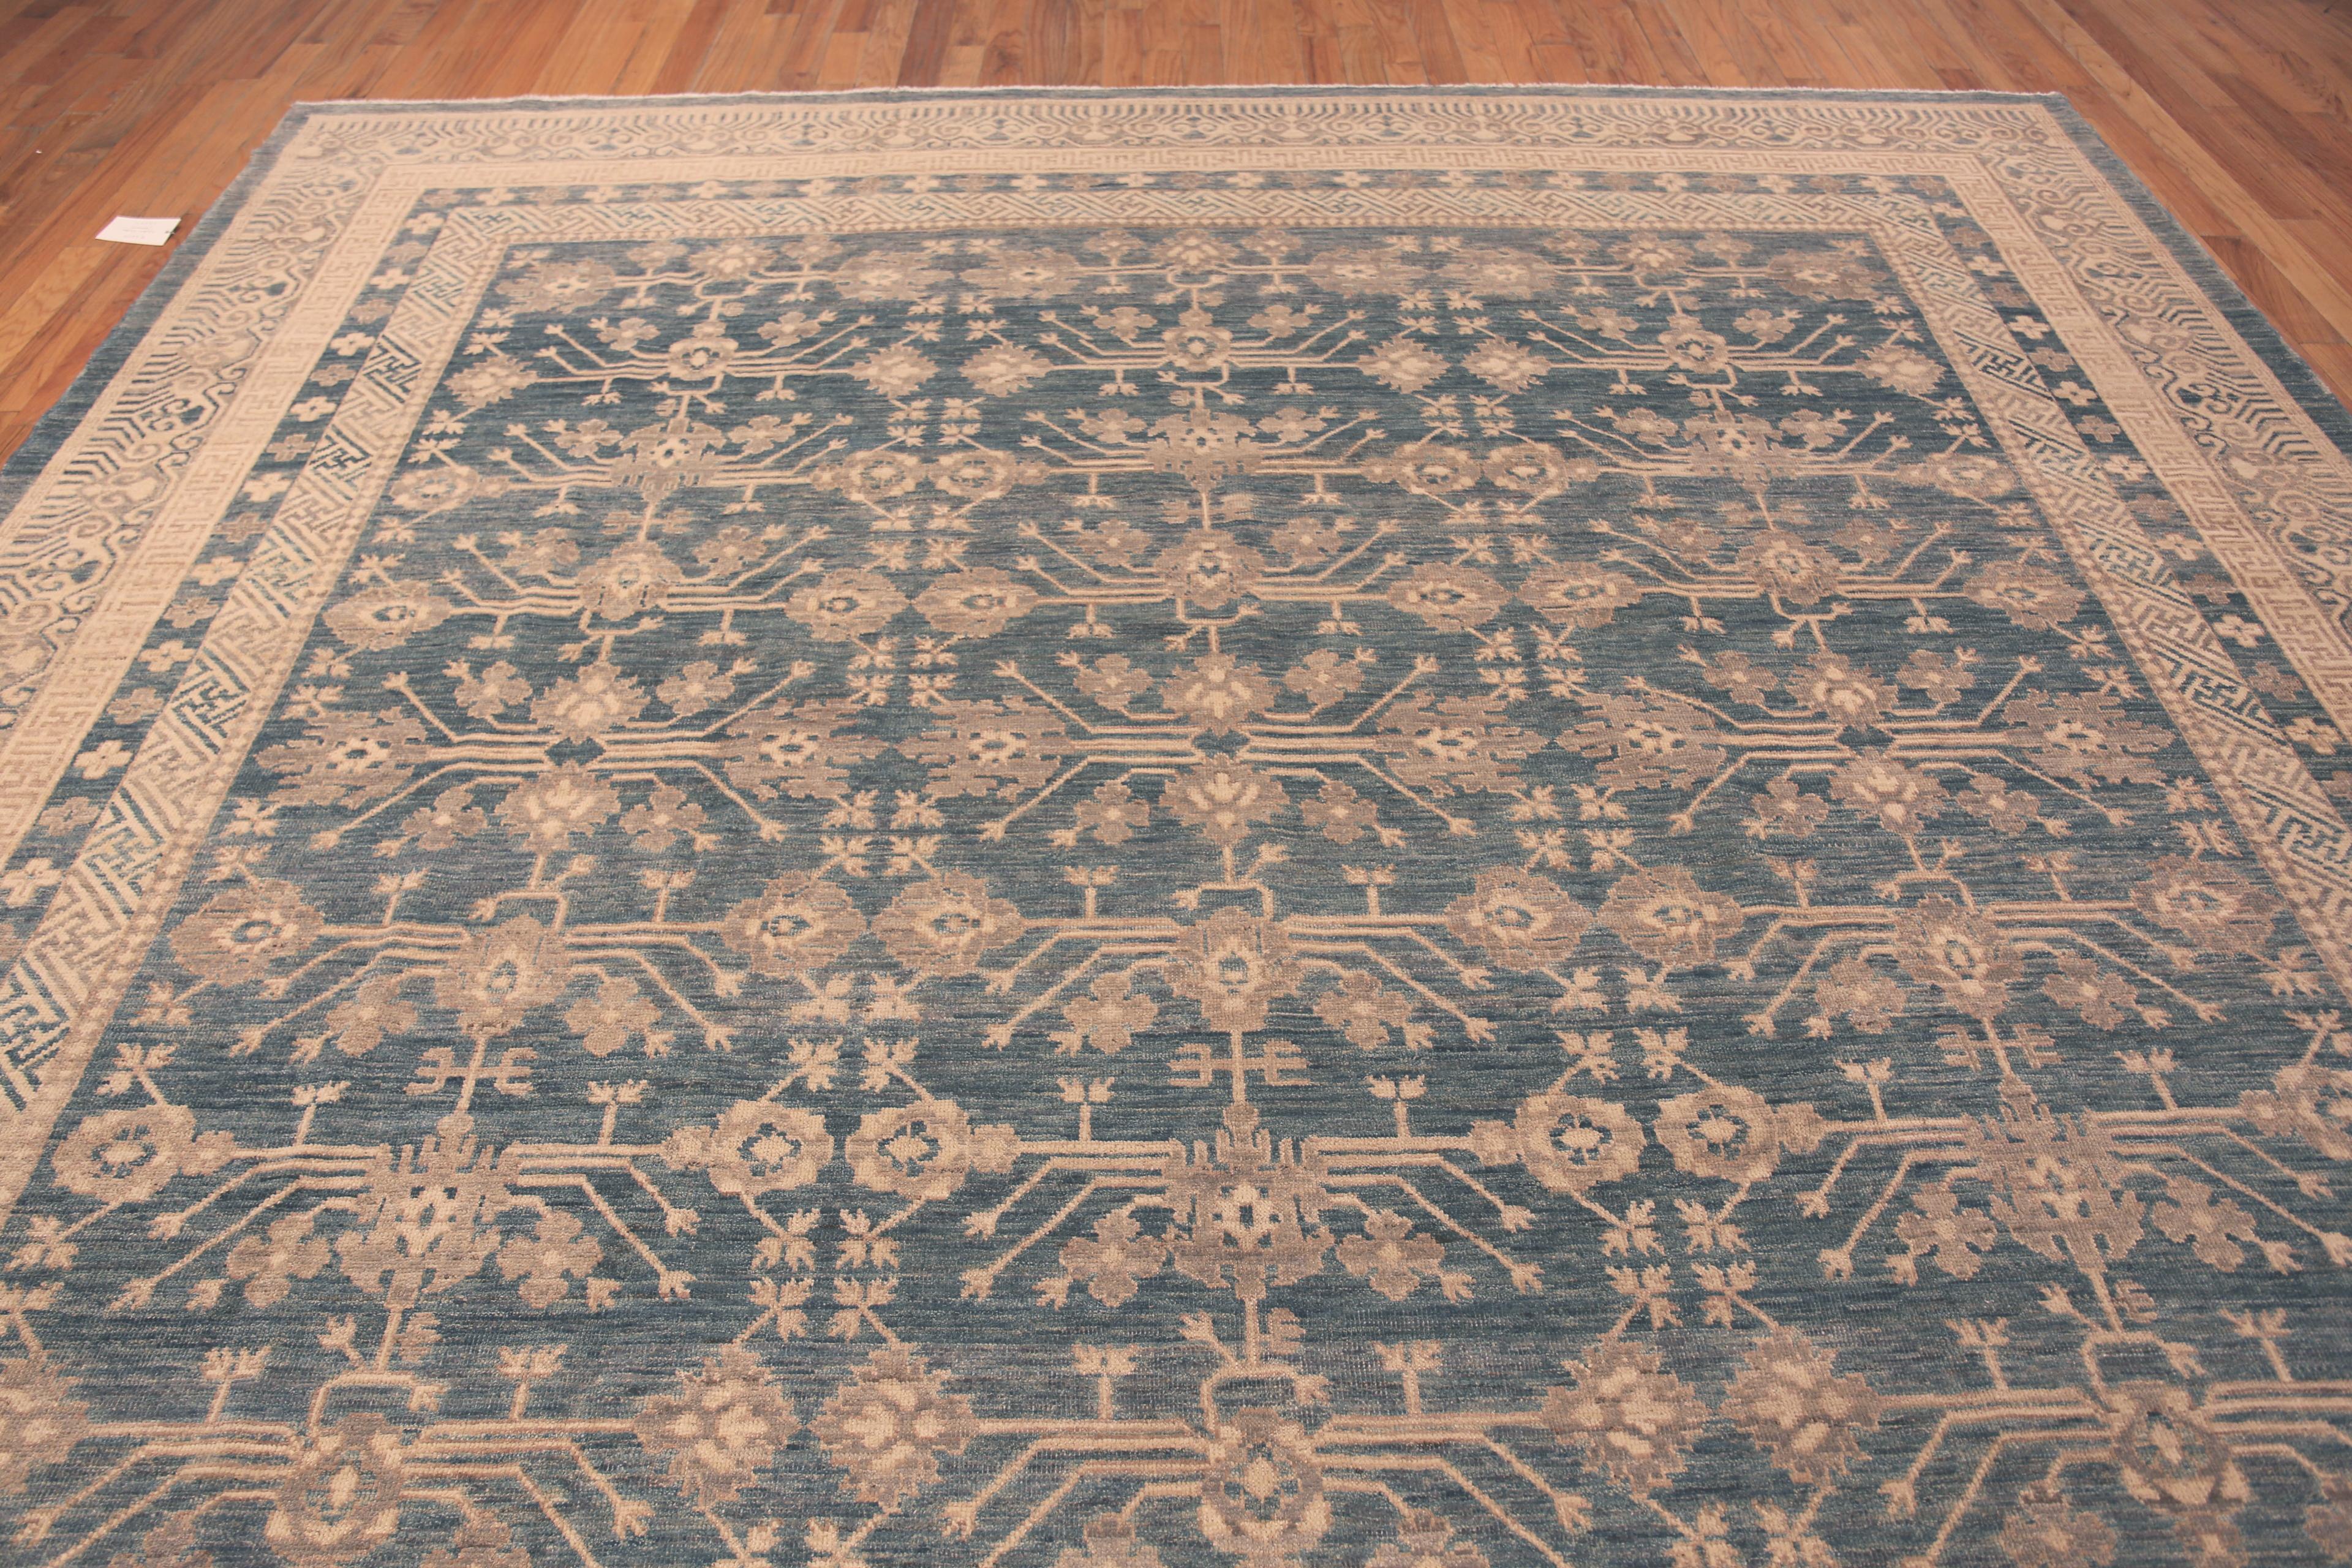 Blue Background Modern Khotan Rug, Country of Origin: Afghanistan. Circa date: Modern. Size: 11 ft 8 in x 12 ft (3.56 m x 3.66 m)